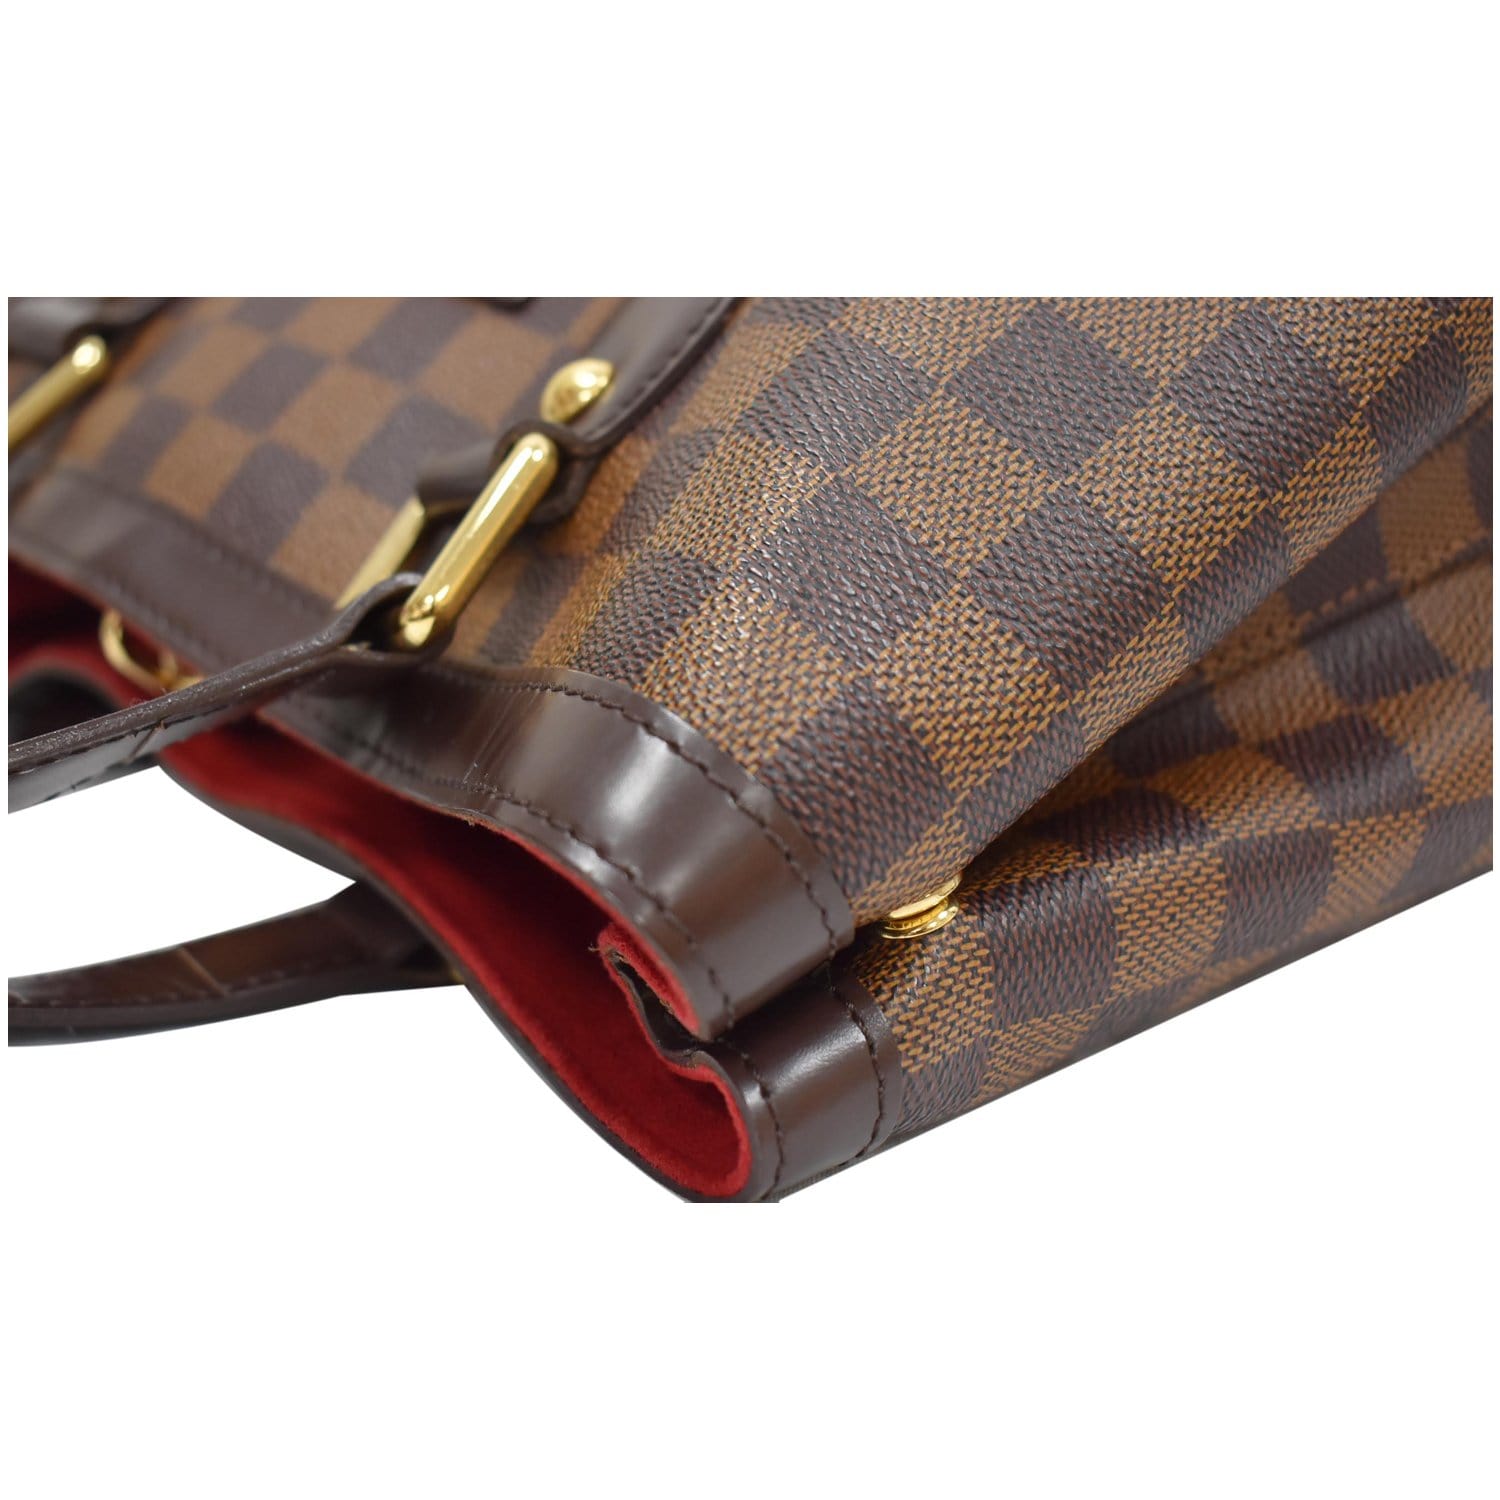 Louis Vuitton 2011 pre-owned Damier Ebene Neverfull PM Tote Bag - Farfetch